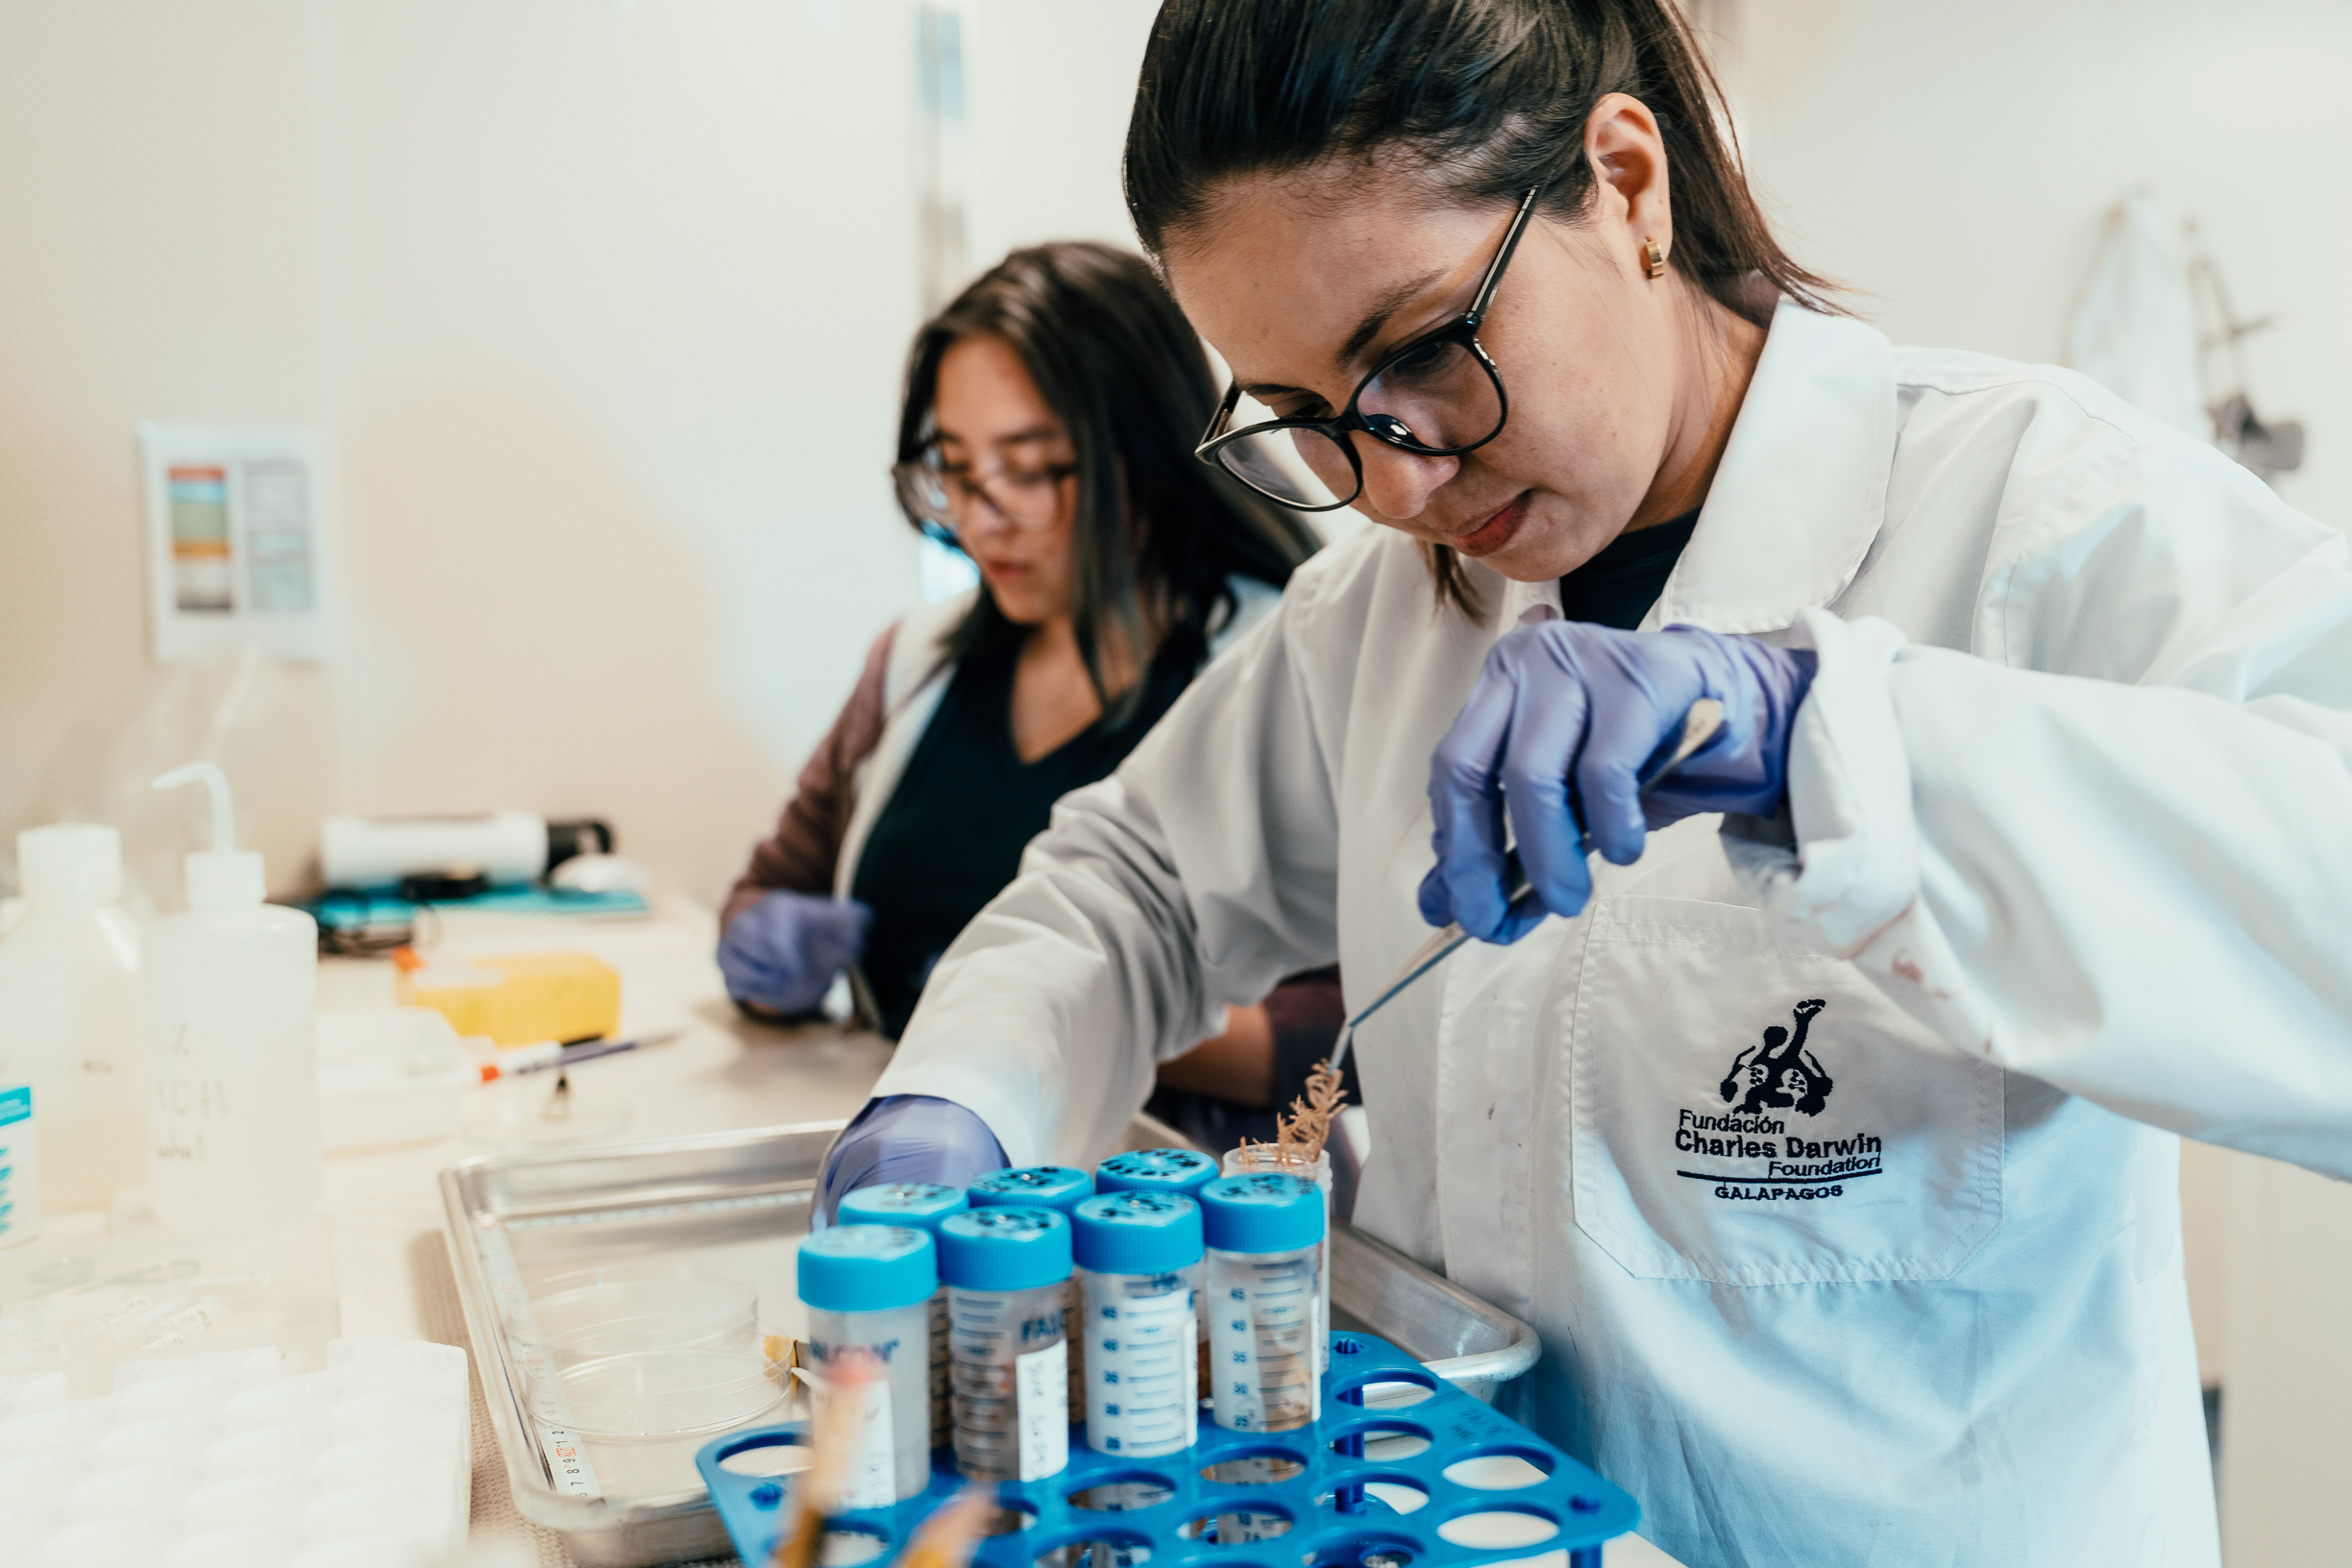 Paulina Sepa-Egas, Charles Darwin Foundation's Marine Collections Auxiliary Assistant & Assistant to the Seamounts Project of the Galapagos Marine Reserve, prepares a deep sea coral for.RNA research during the September-October 2023 expedition in the Galapafos Marine Reserve.